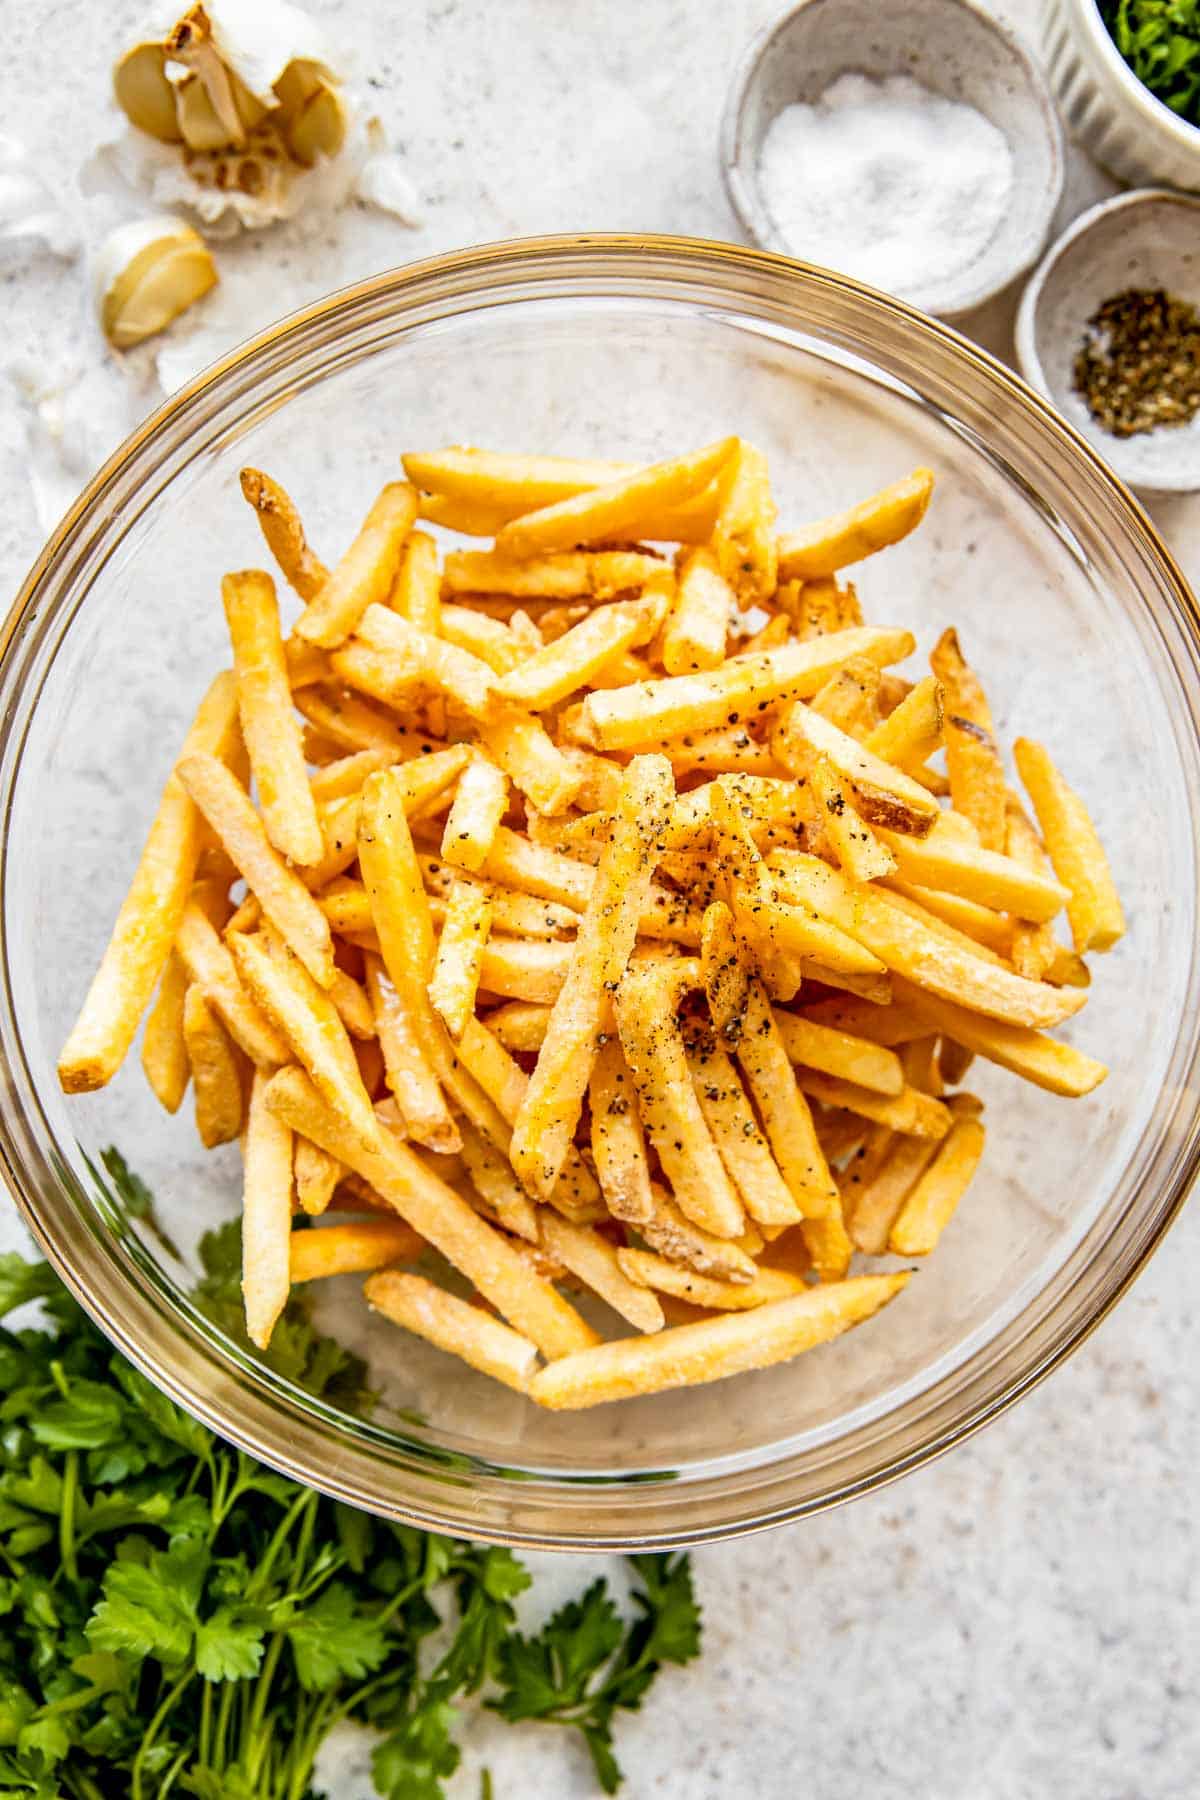 Fries are placed in a glass bowl with seasonings. 